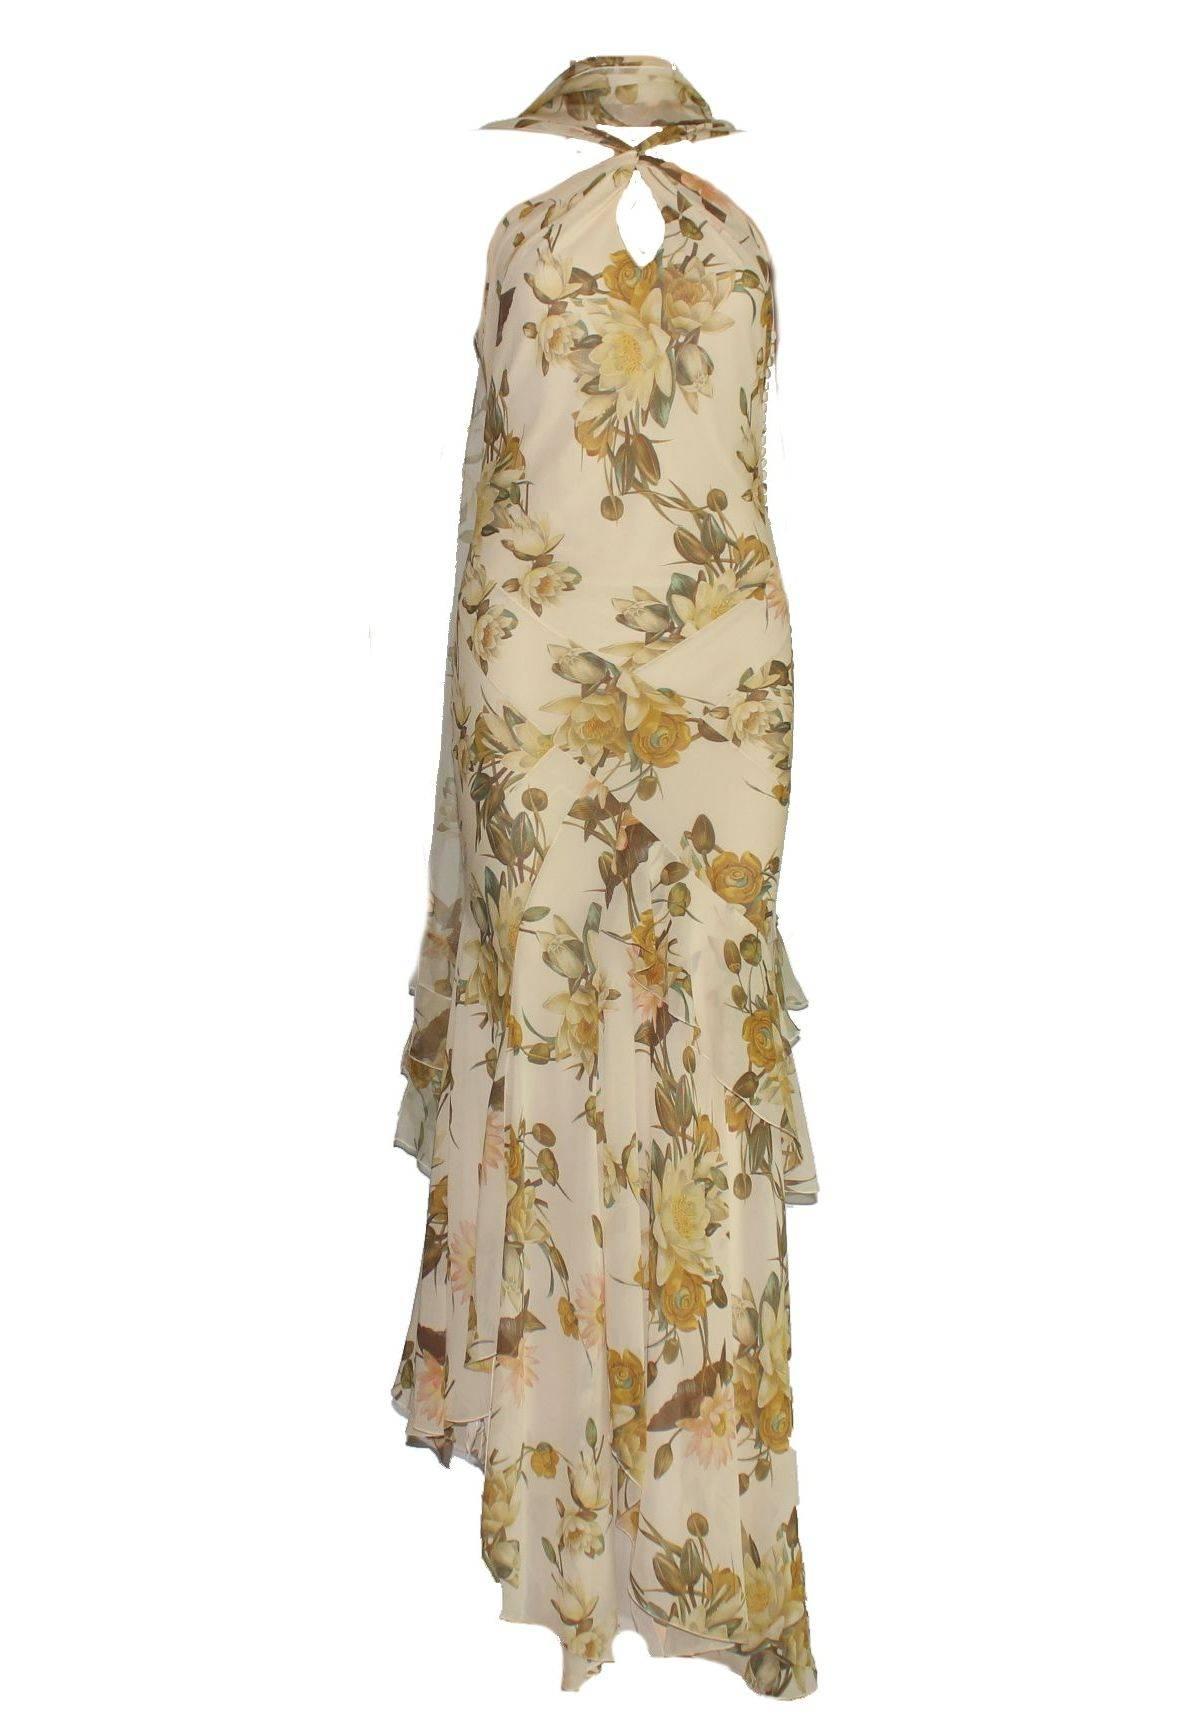 Christian Dior Floral Silk Evening Dress Gown with Matching Silk Stola Shawl  1